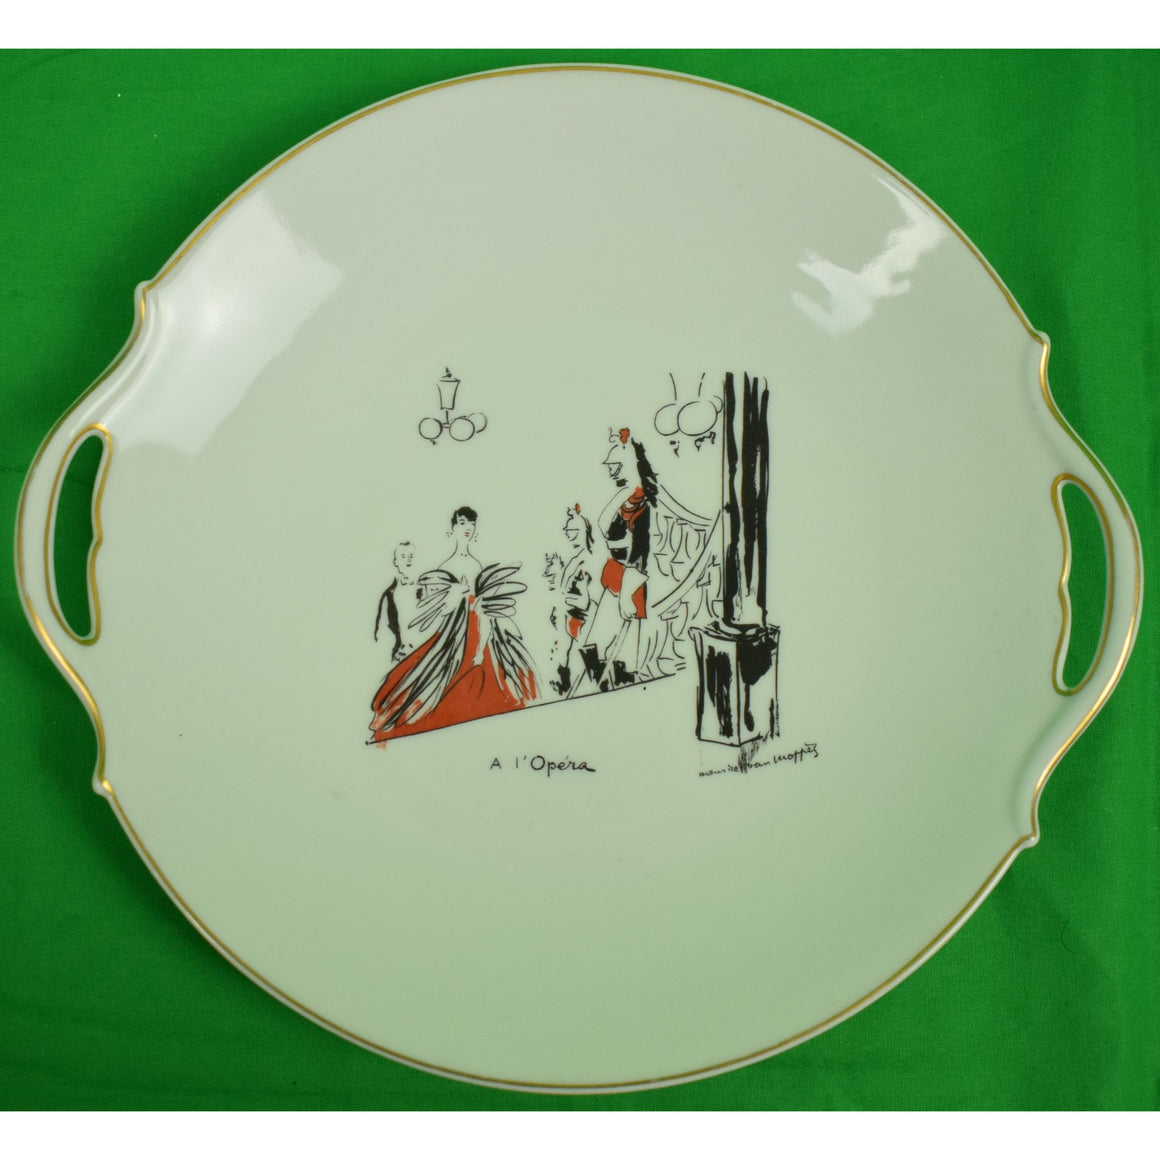 Limoges French Serving Plate a l'Opera by Maurice Van Moppes (1904-1957)